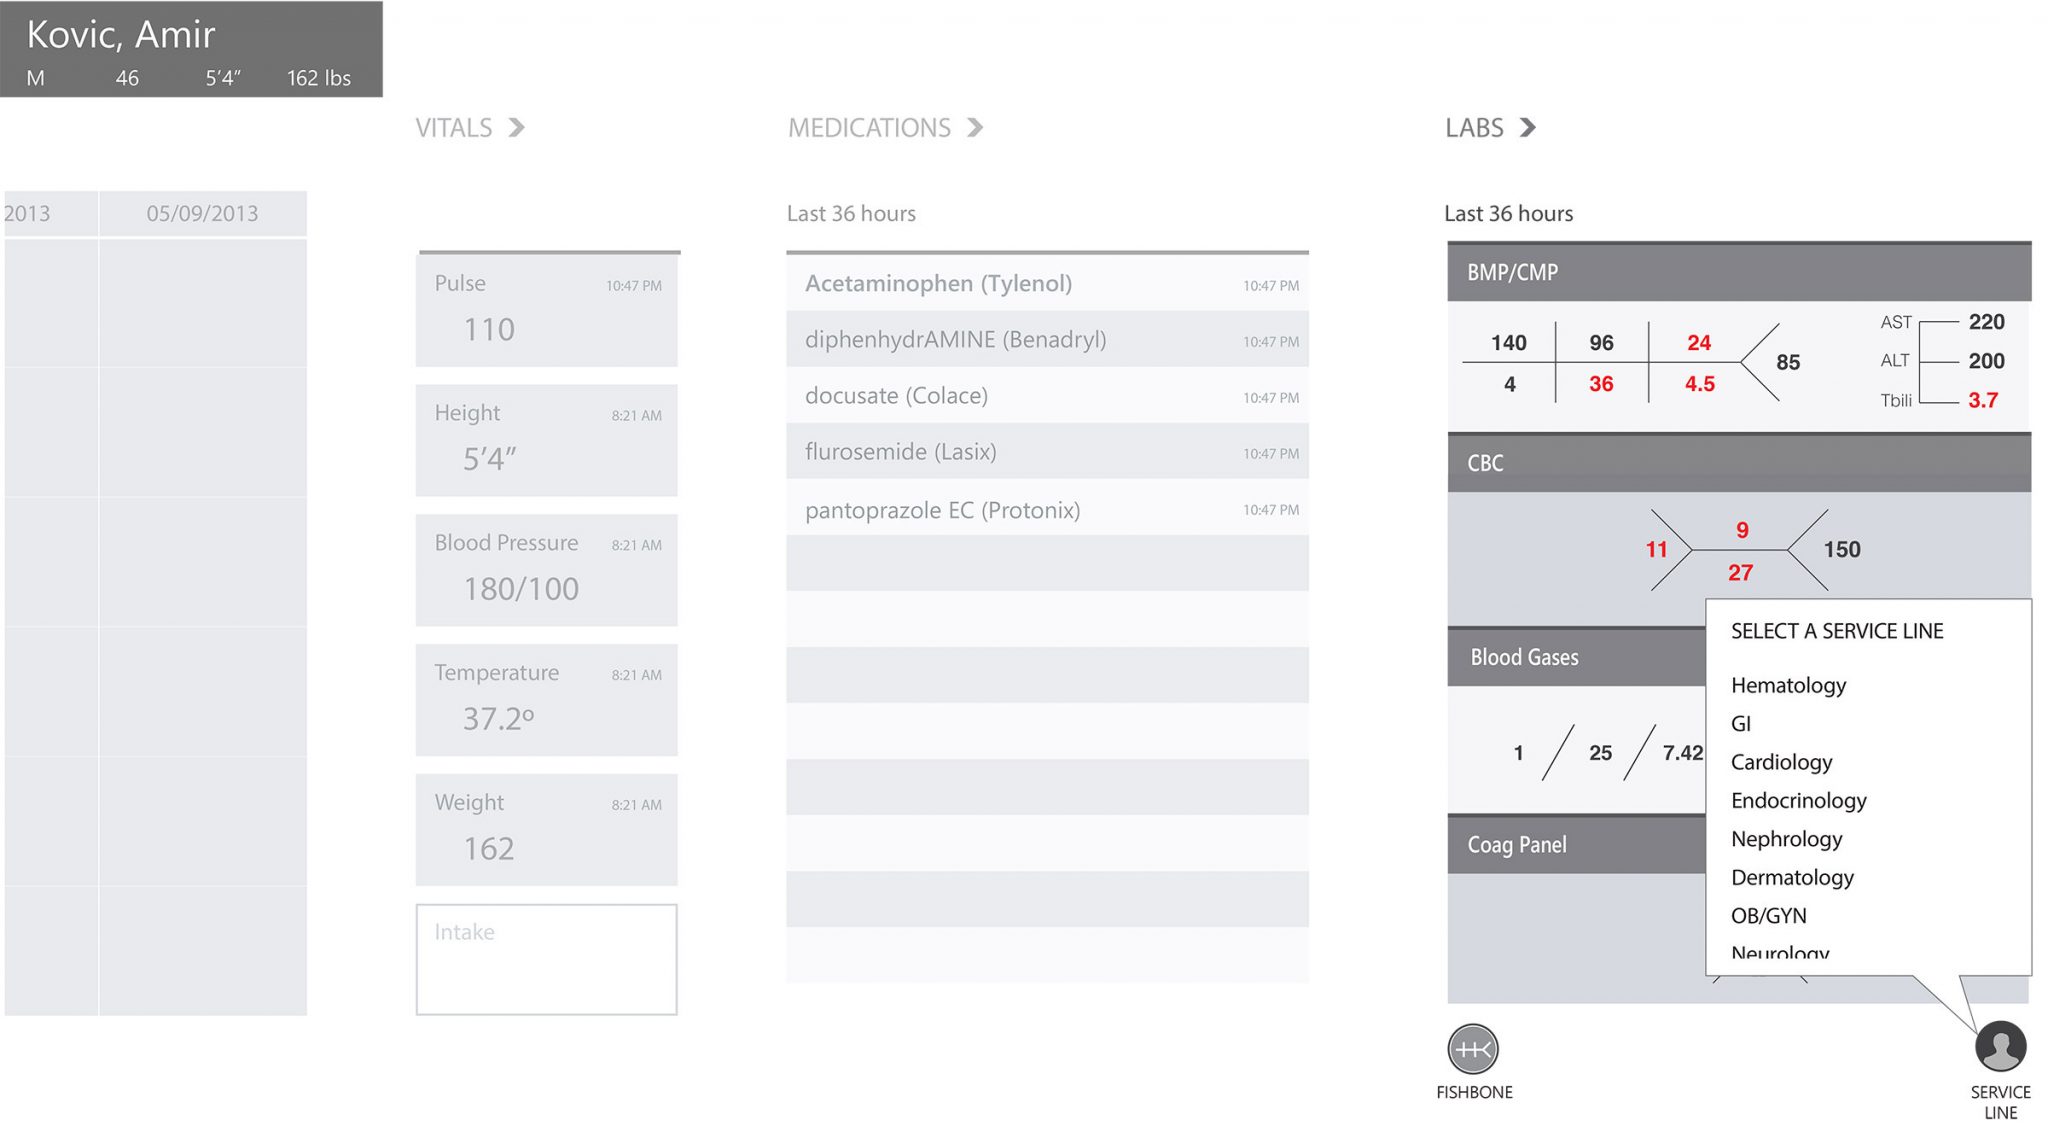 Greyscale wireframes of the left-to-right flow of patient health data. Currently, Vitals is visible. Under the labs section, abnormal values are in red text. A toggle menu is selected, letting the user switch between pertinent labs for different medical specialties.